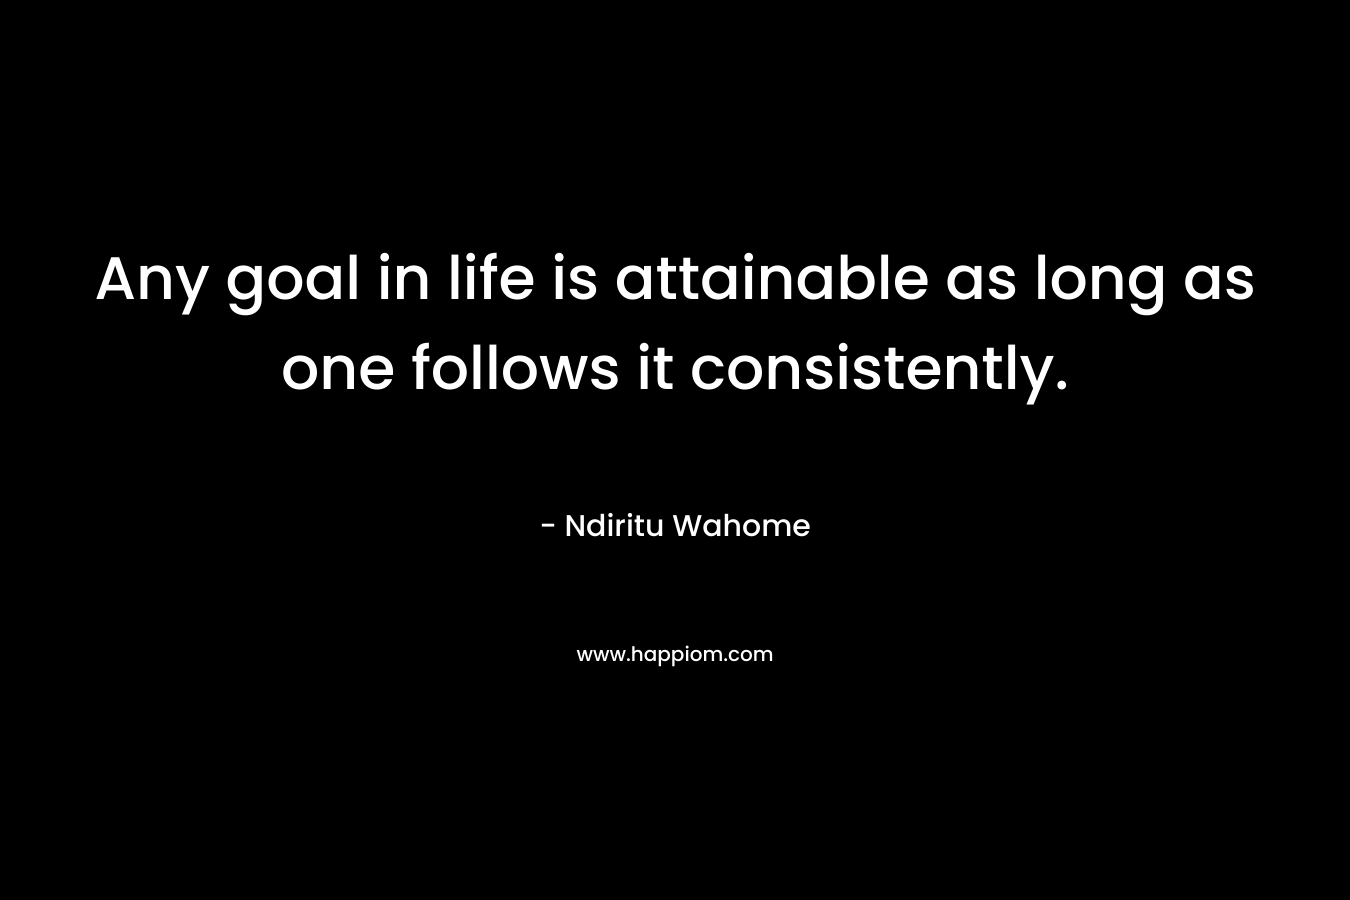 Any goal in life is attainable as long as one follows it consistently.